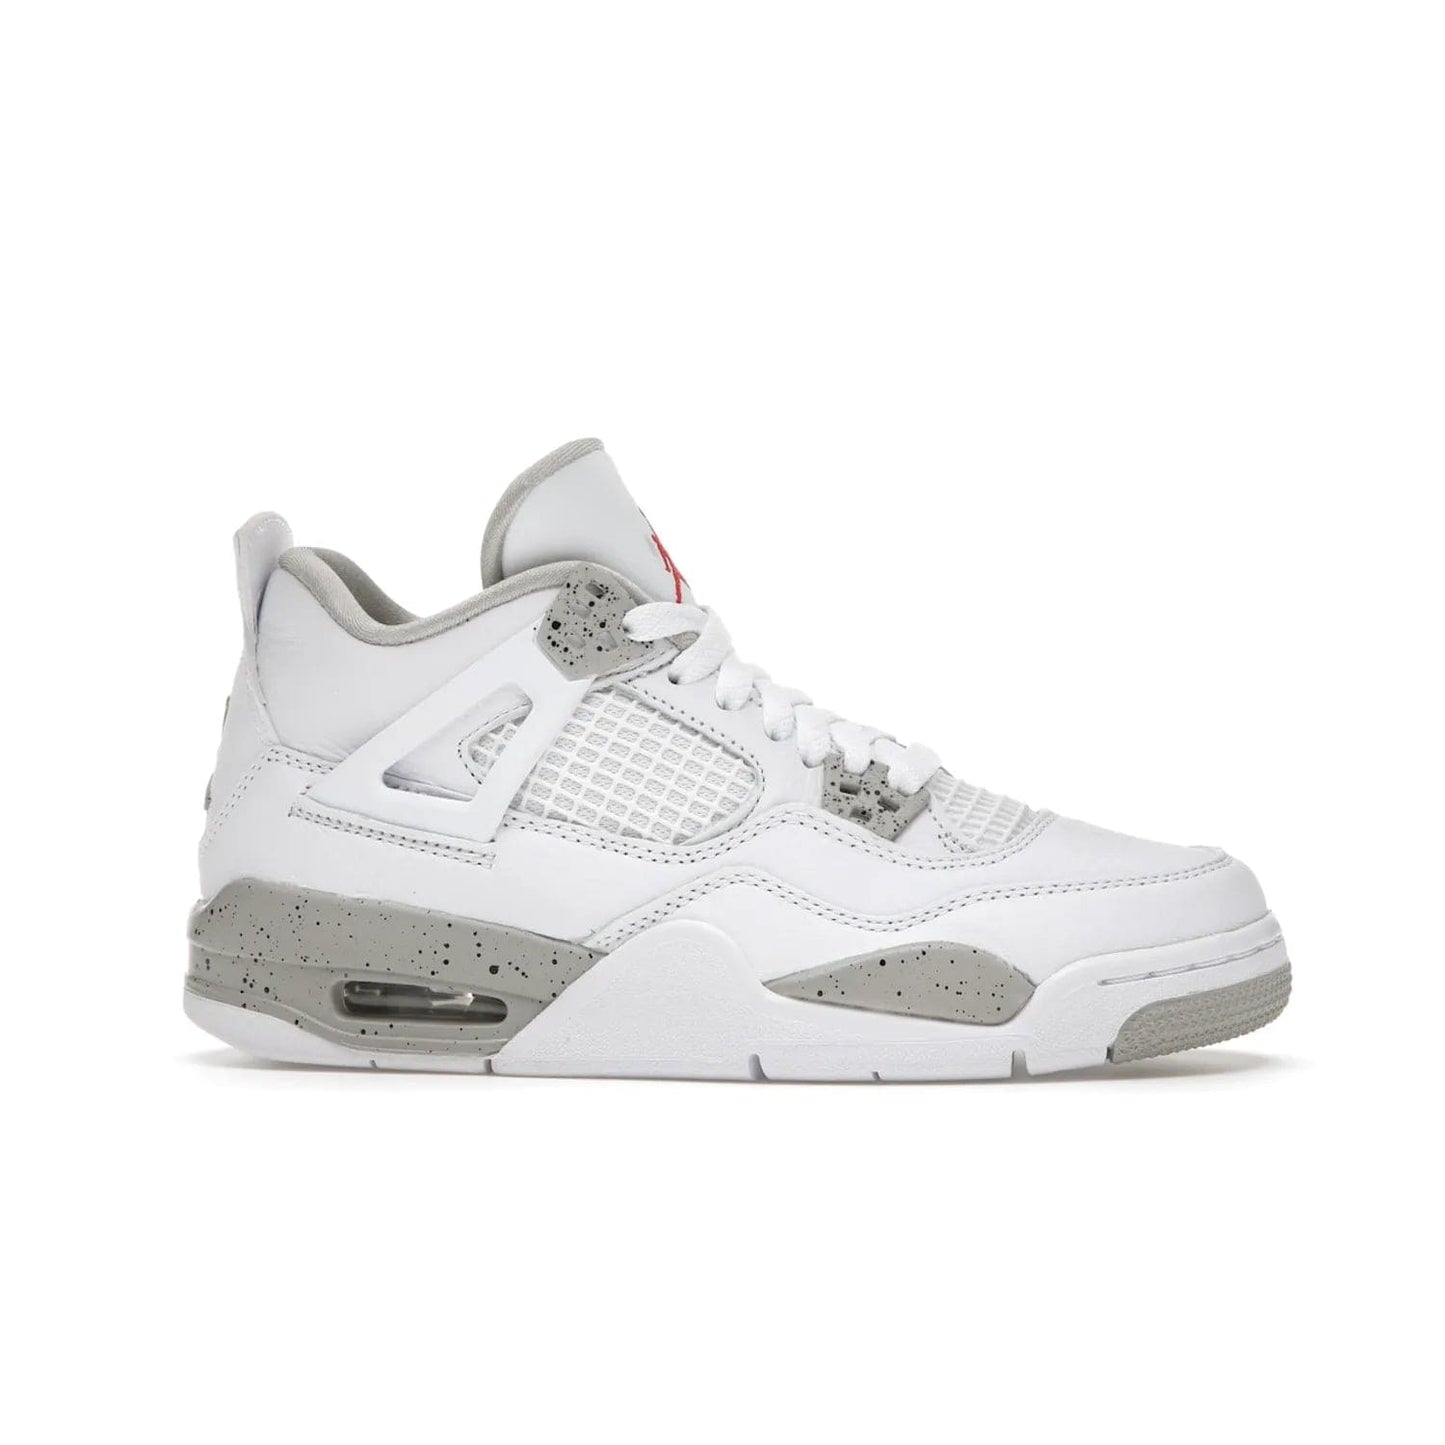 Jordan 4 Retro White Oreo (2021) (GS) - Image 2 - Only at www.BallersClubKickz.com - White Oreo Air Jordan 4 Retro 2021 GS - Iconic sneaker silhouette with white canvas upper, Tech Grey detailing, and Fire Red accents. Available July 2021.